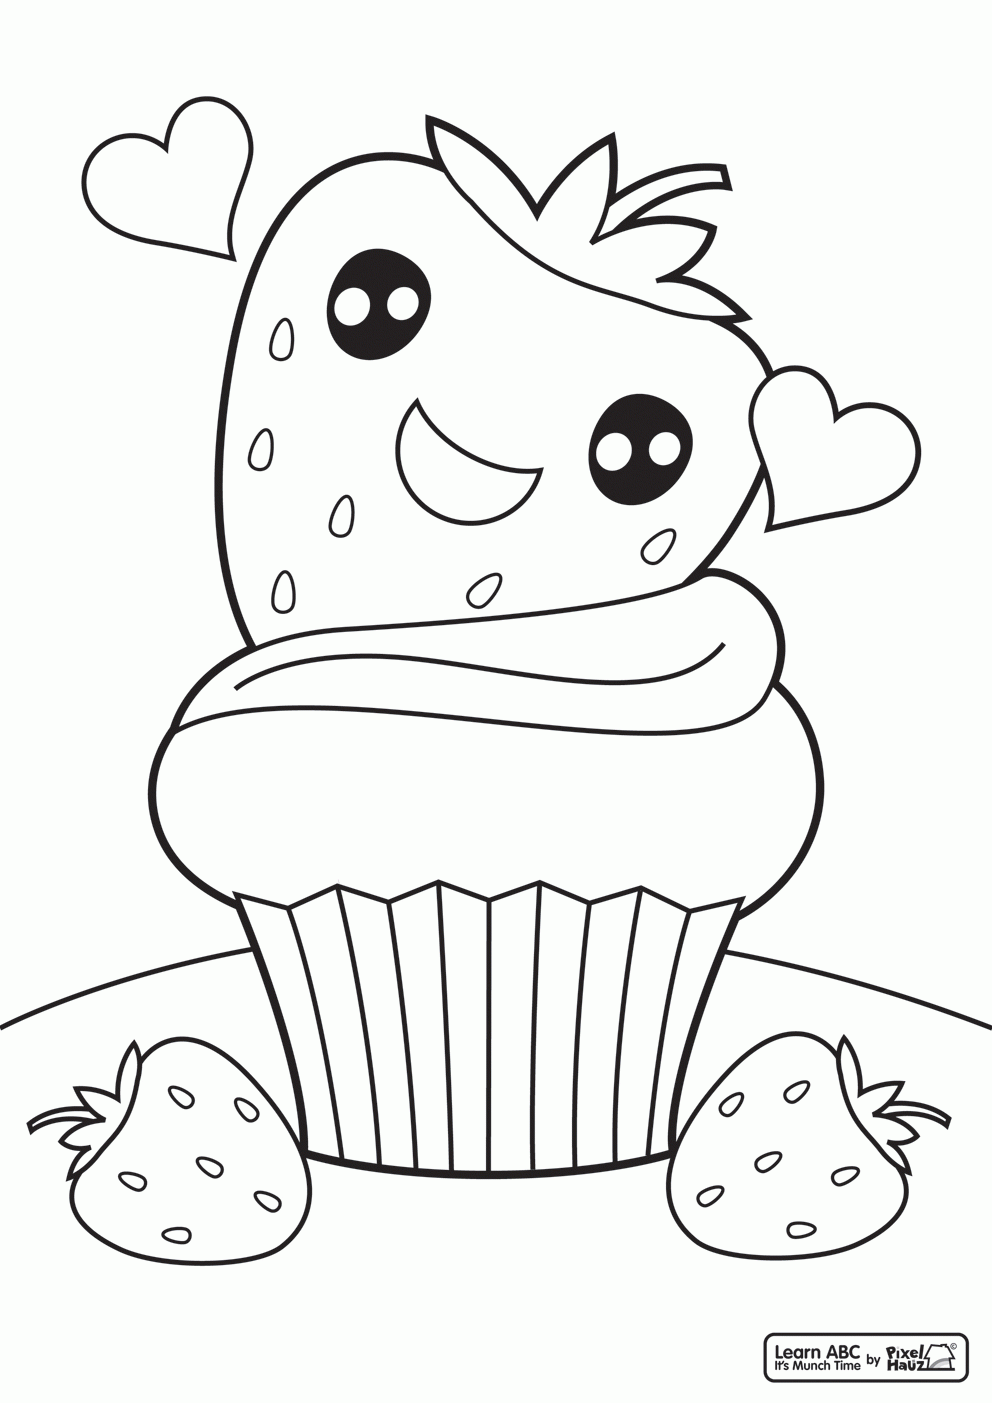 coloring pages and sheets can be found in the Food color page ...